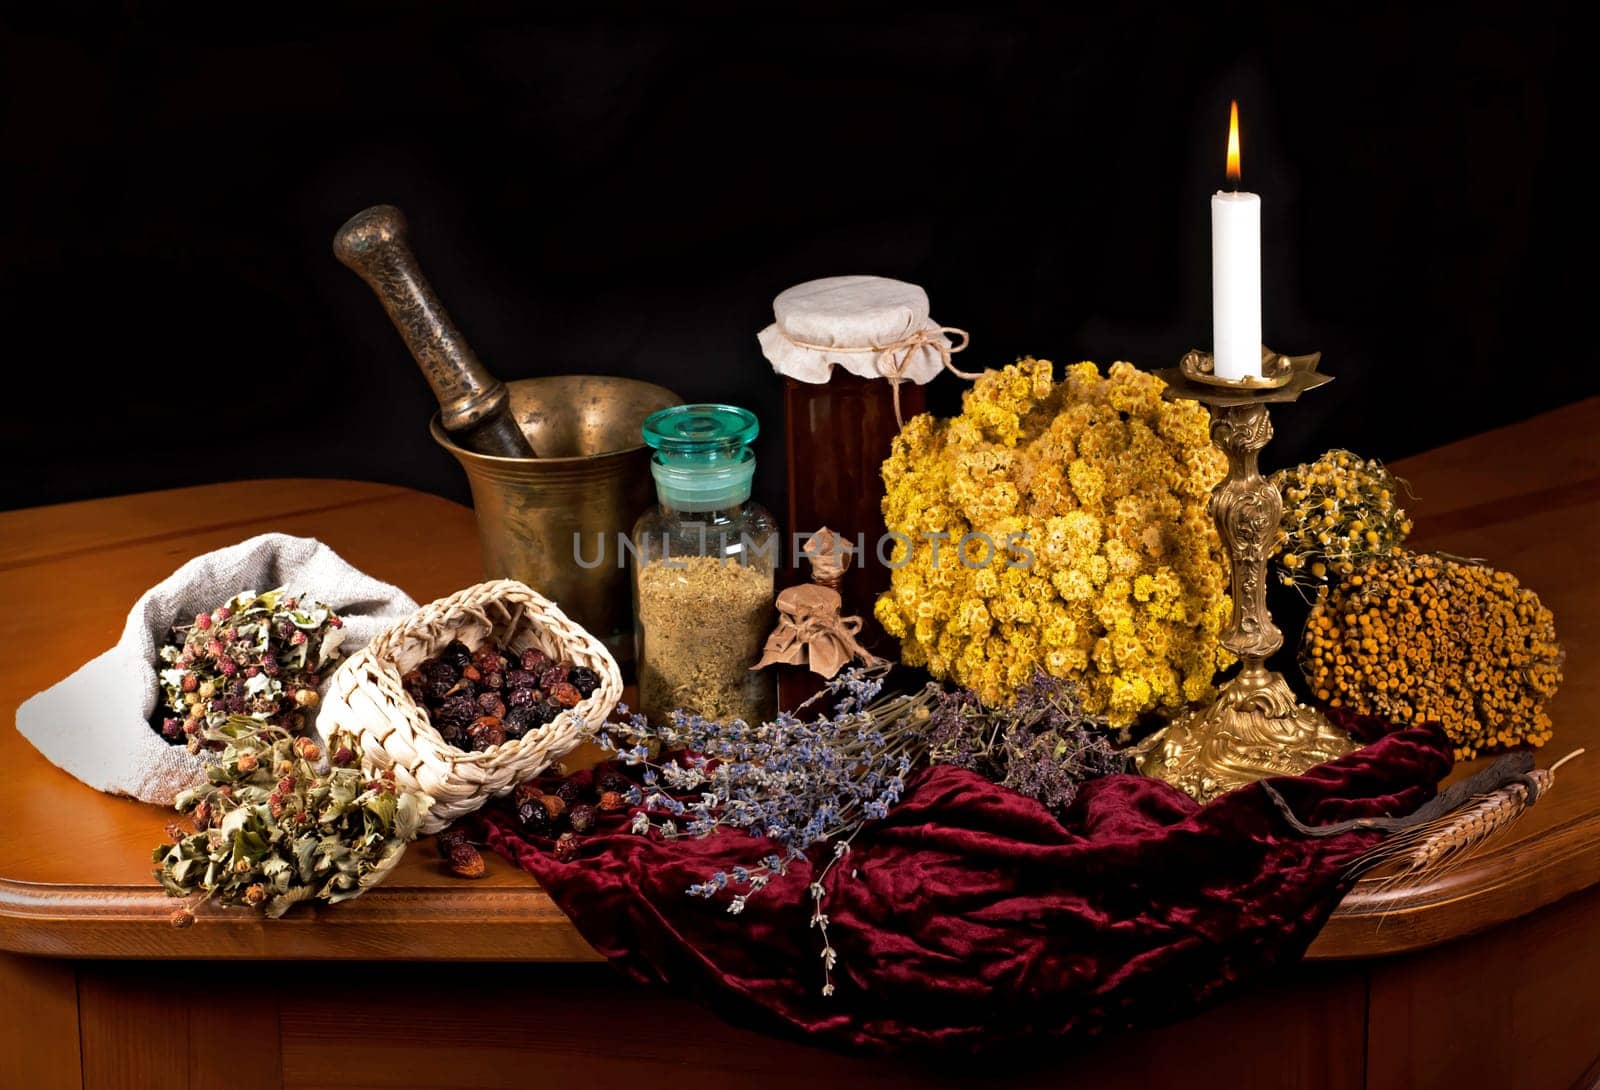 Dried healing herbs, flowers and candles, ritual purification , copyspace Close up of healing herbs alchemist stuff. Old pharmacy, alternative medicine concept. mortar and pestle. on a black background. wooden table. by aprilphoto